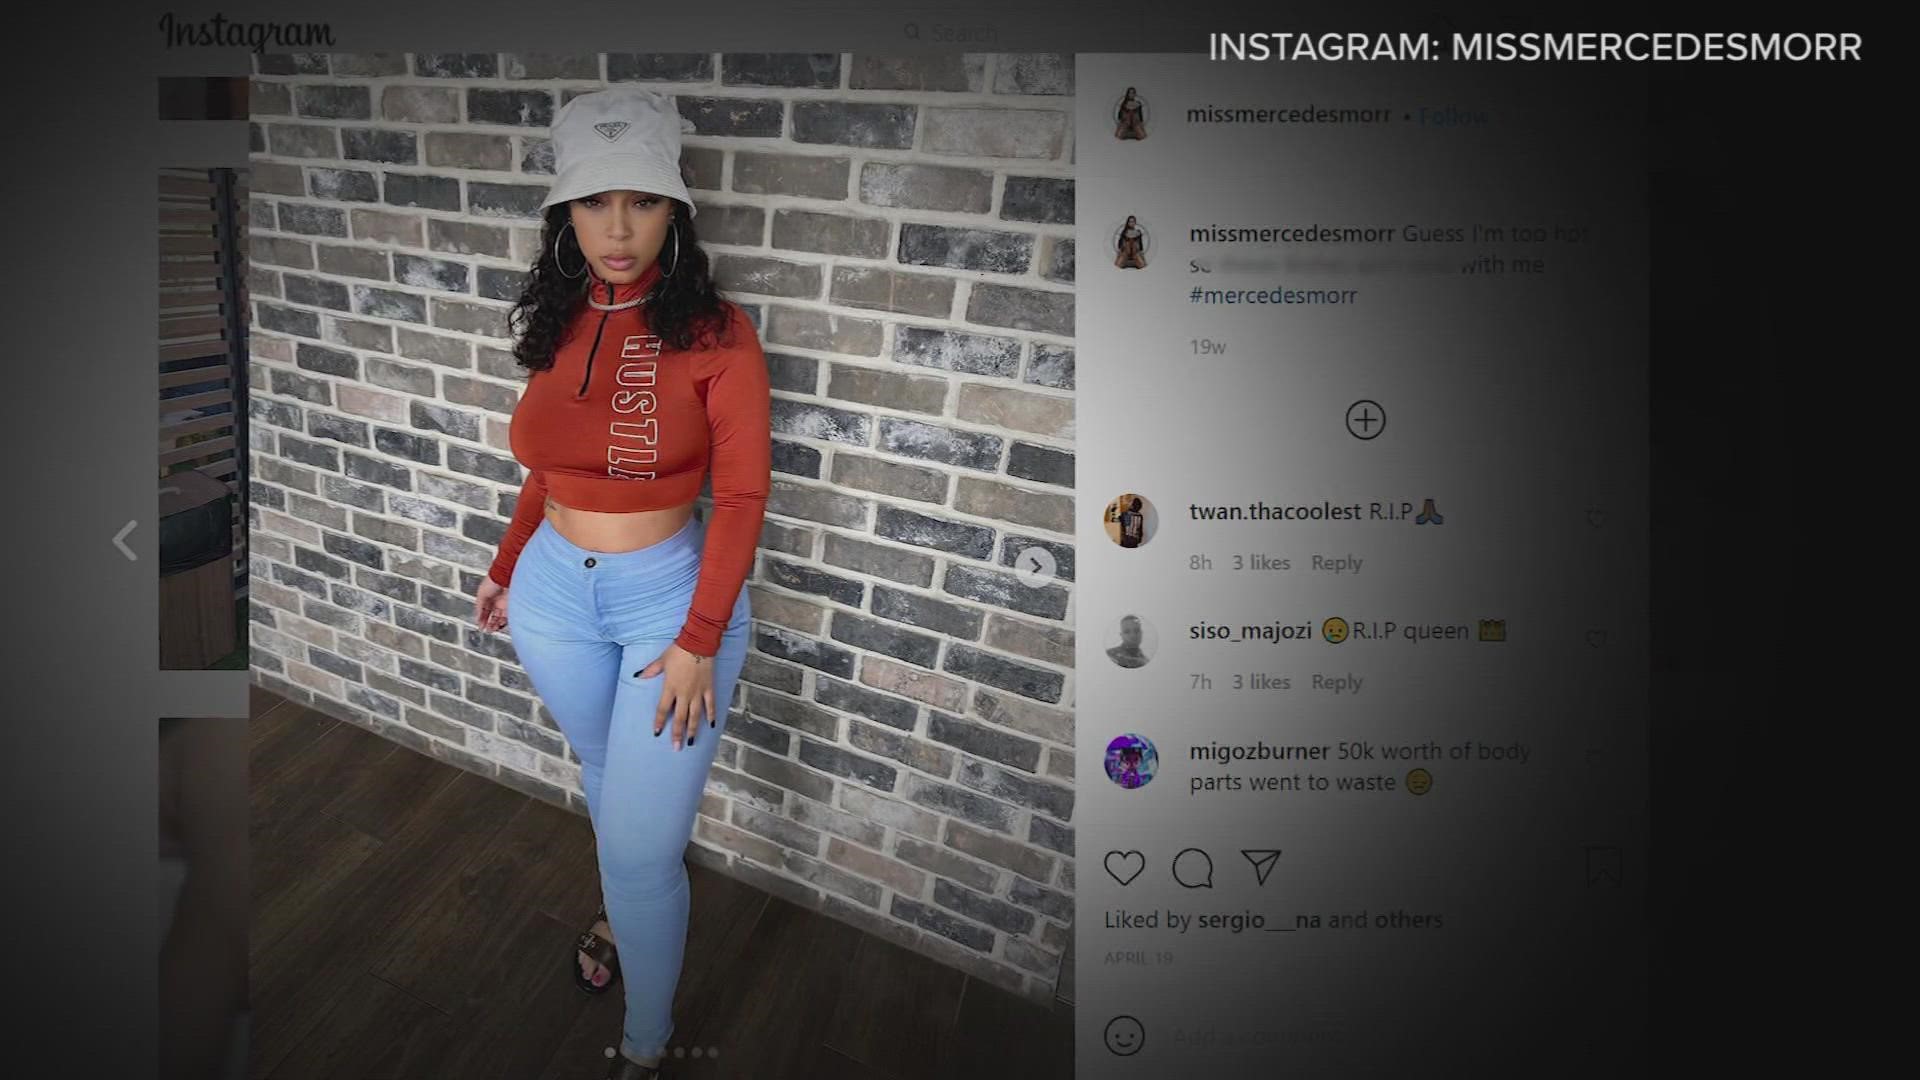 The body of 33-year-old Janae Gagnier, who called herself “Miss Mercedes Morr” on Instagram, was found at her home on Sunday. She'd been strangled.